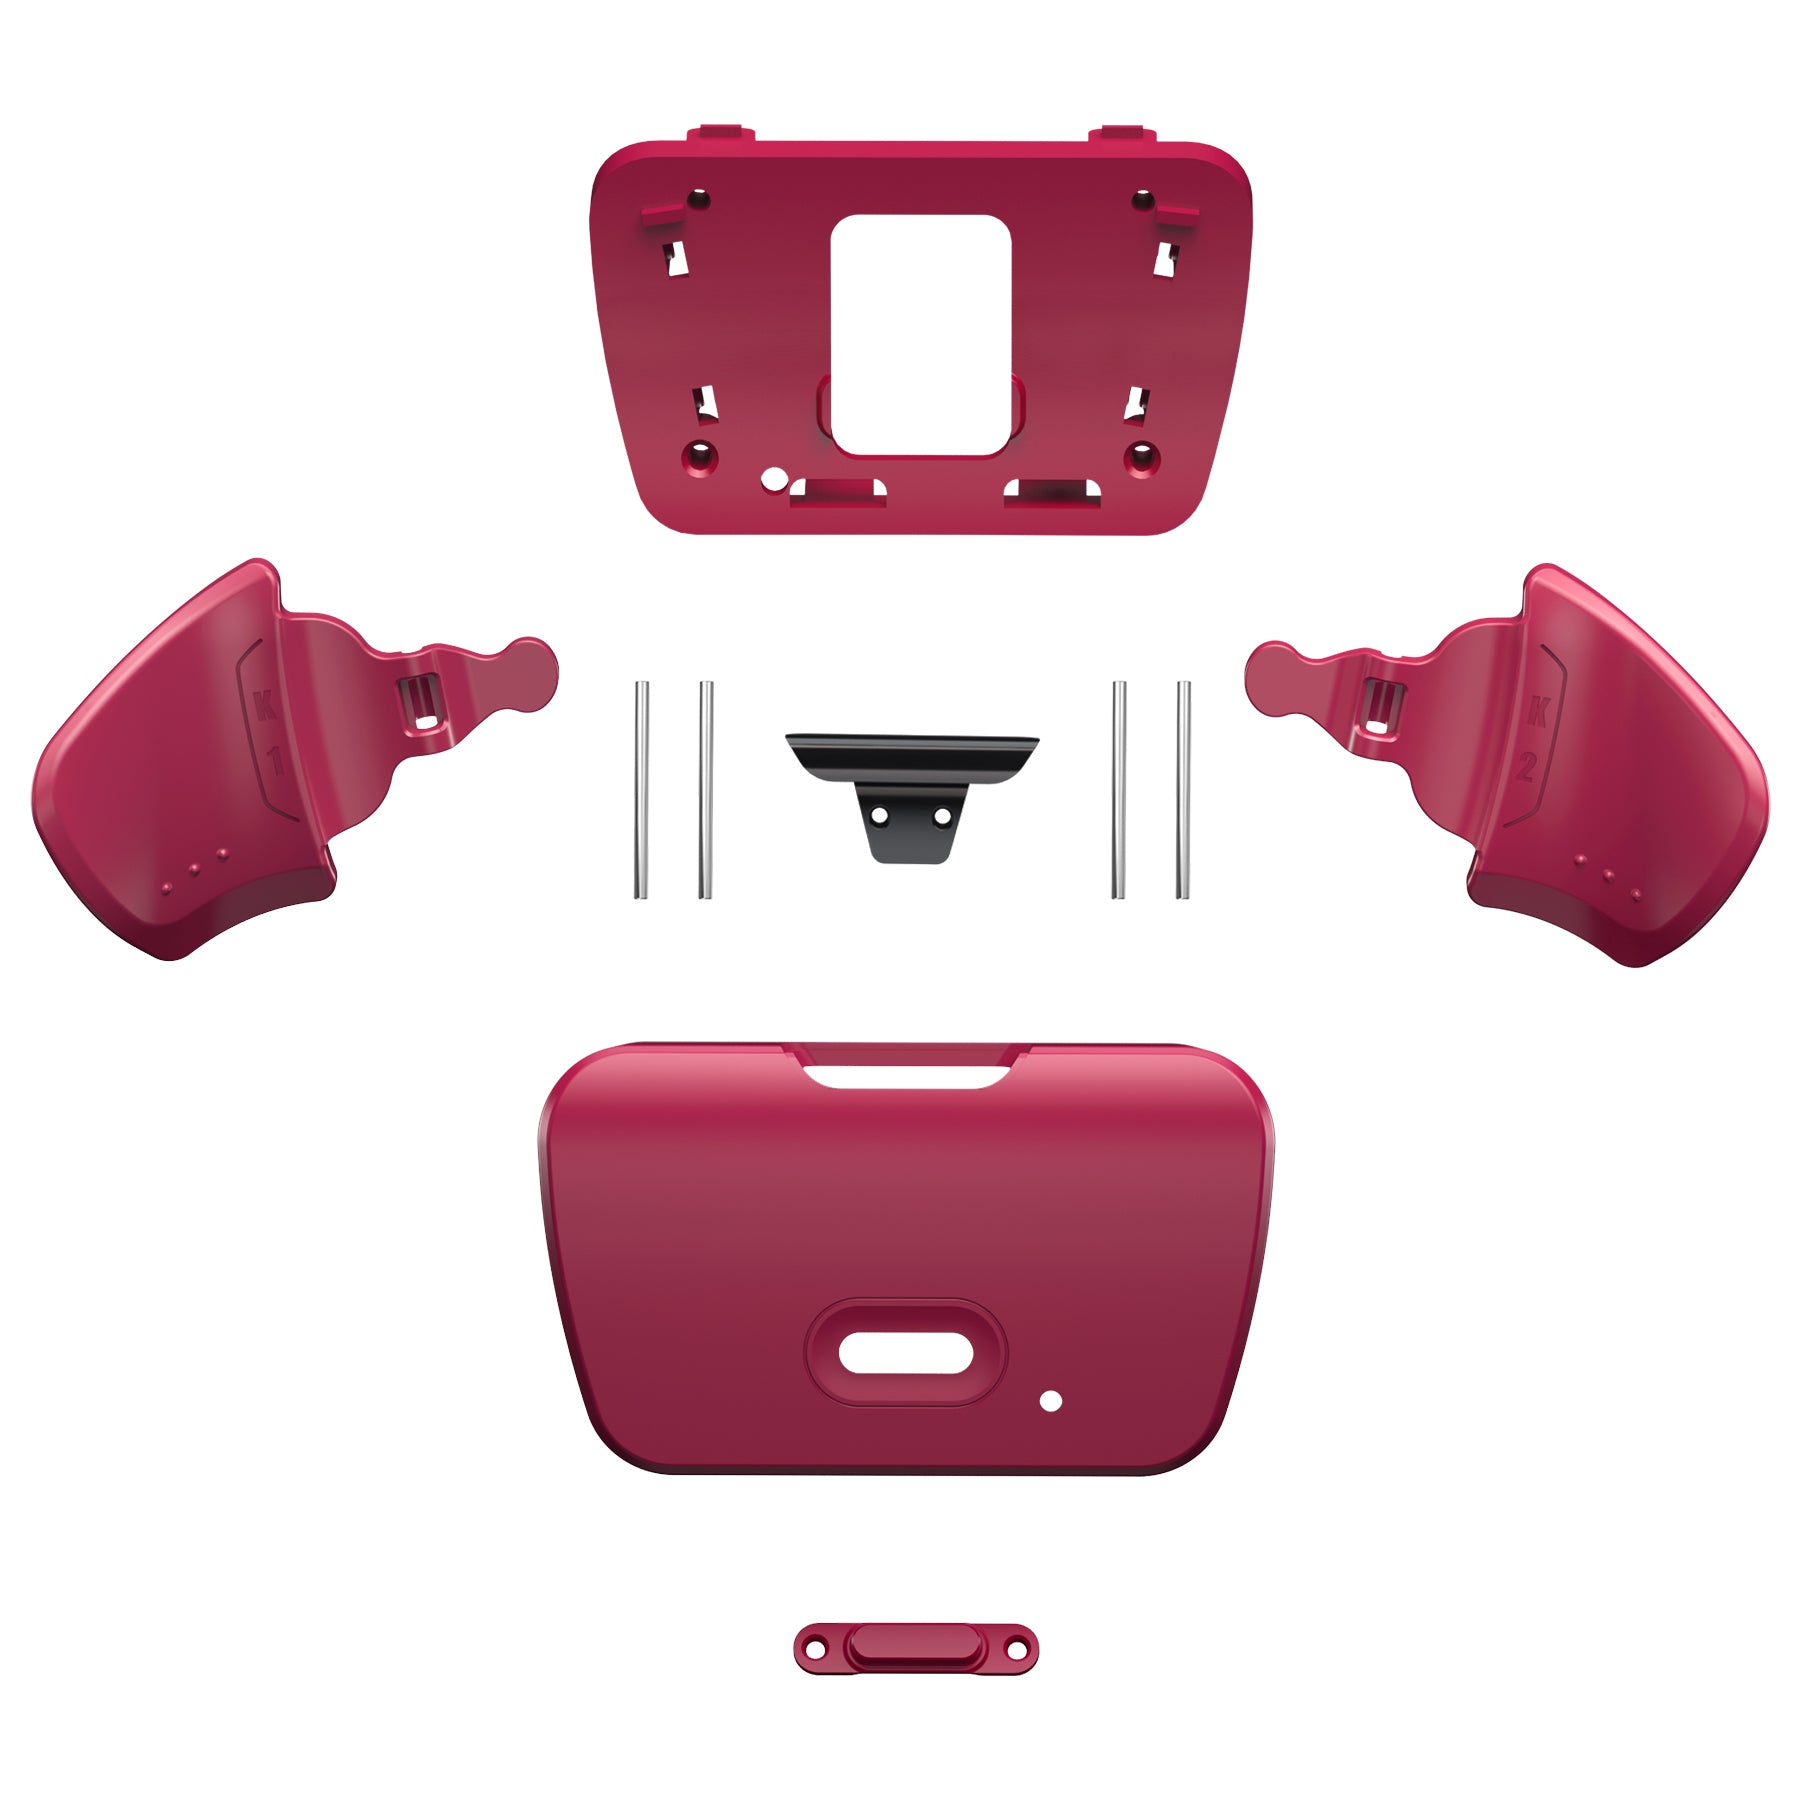 eXtremeRate Retail Cosmic Red Replacement Redesigned K1 K2 Back Button Housing Shell for ps5 Controller eXtremerate RISE Remap Kit - Controller & RISE Remap Board NOT Included - WPFM5008